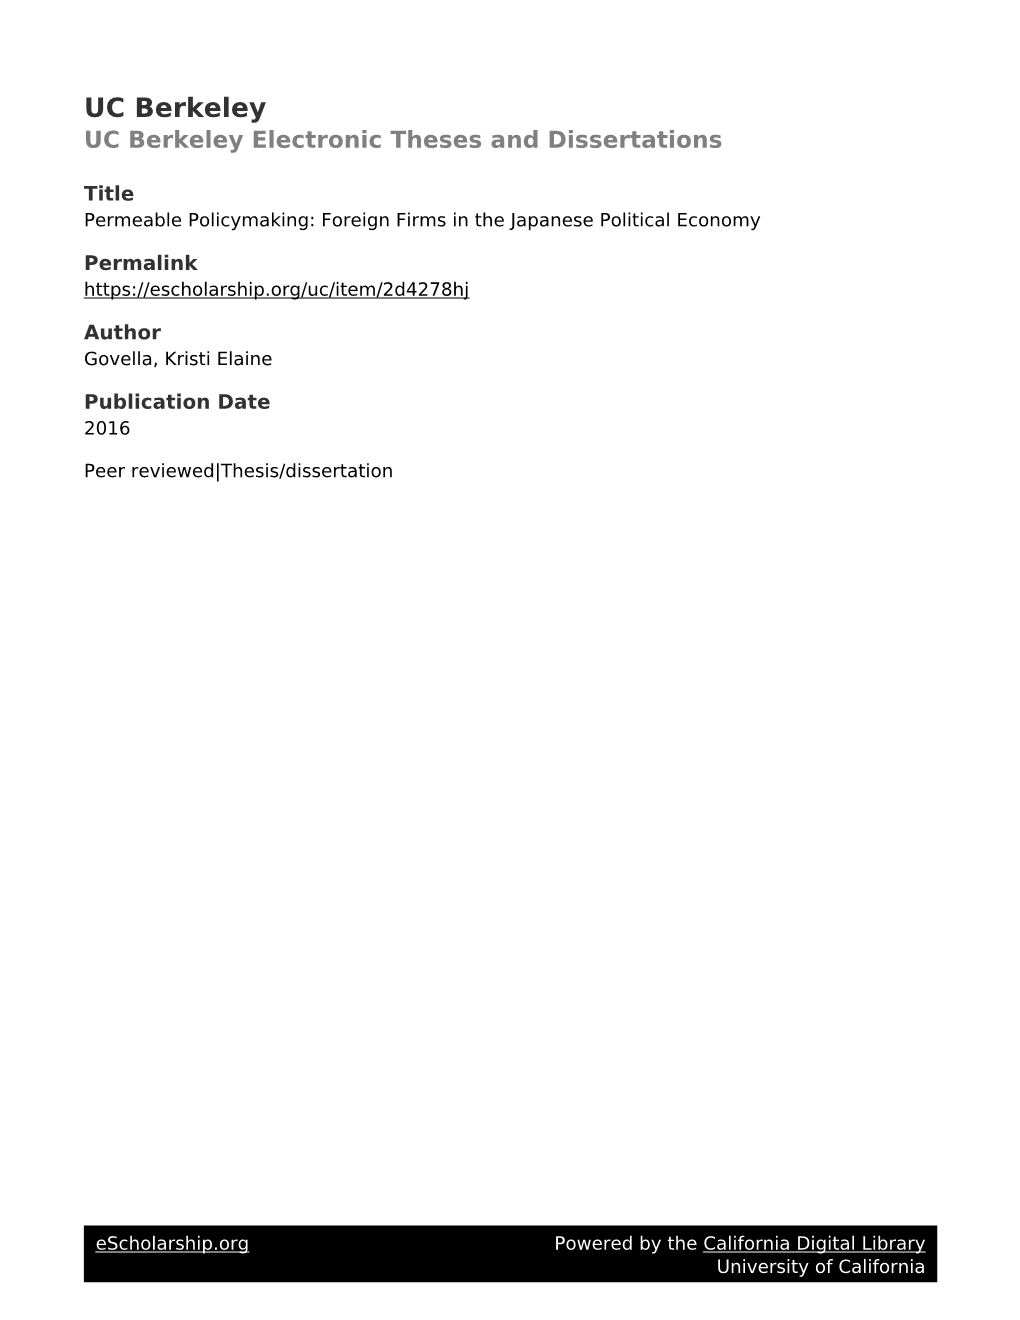 Permeable Policymaking: Foreign Firms in the Japanese Political Economy